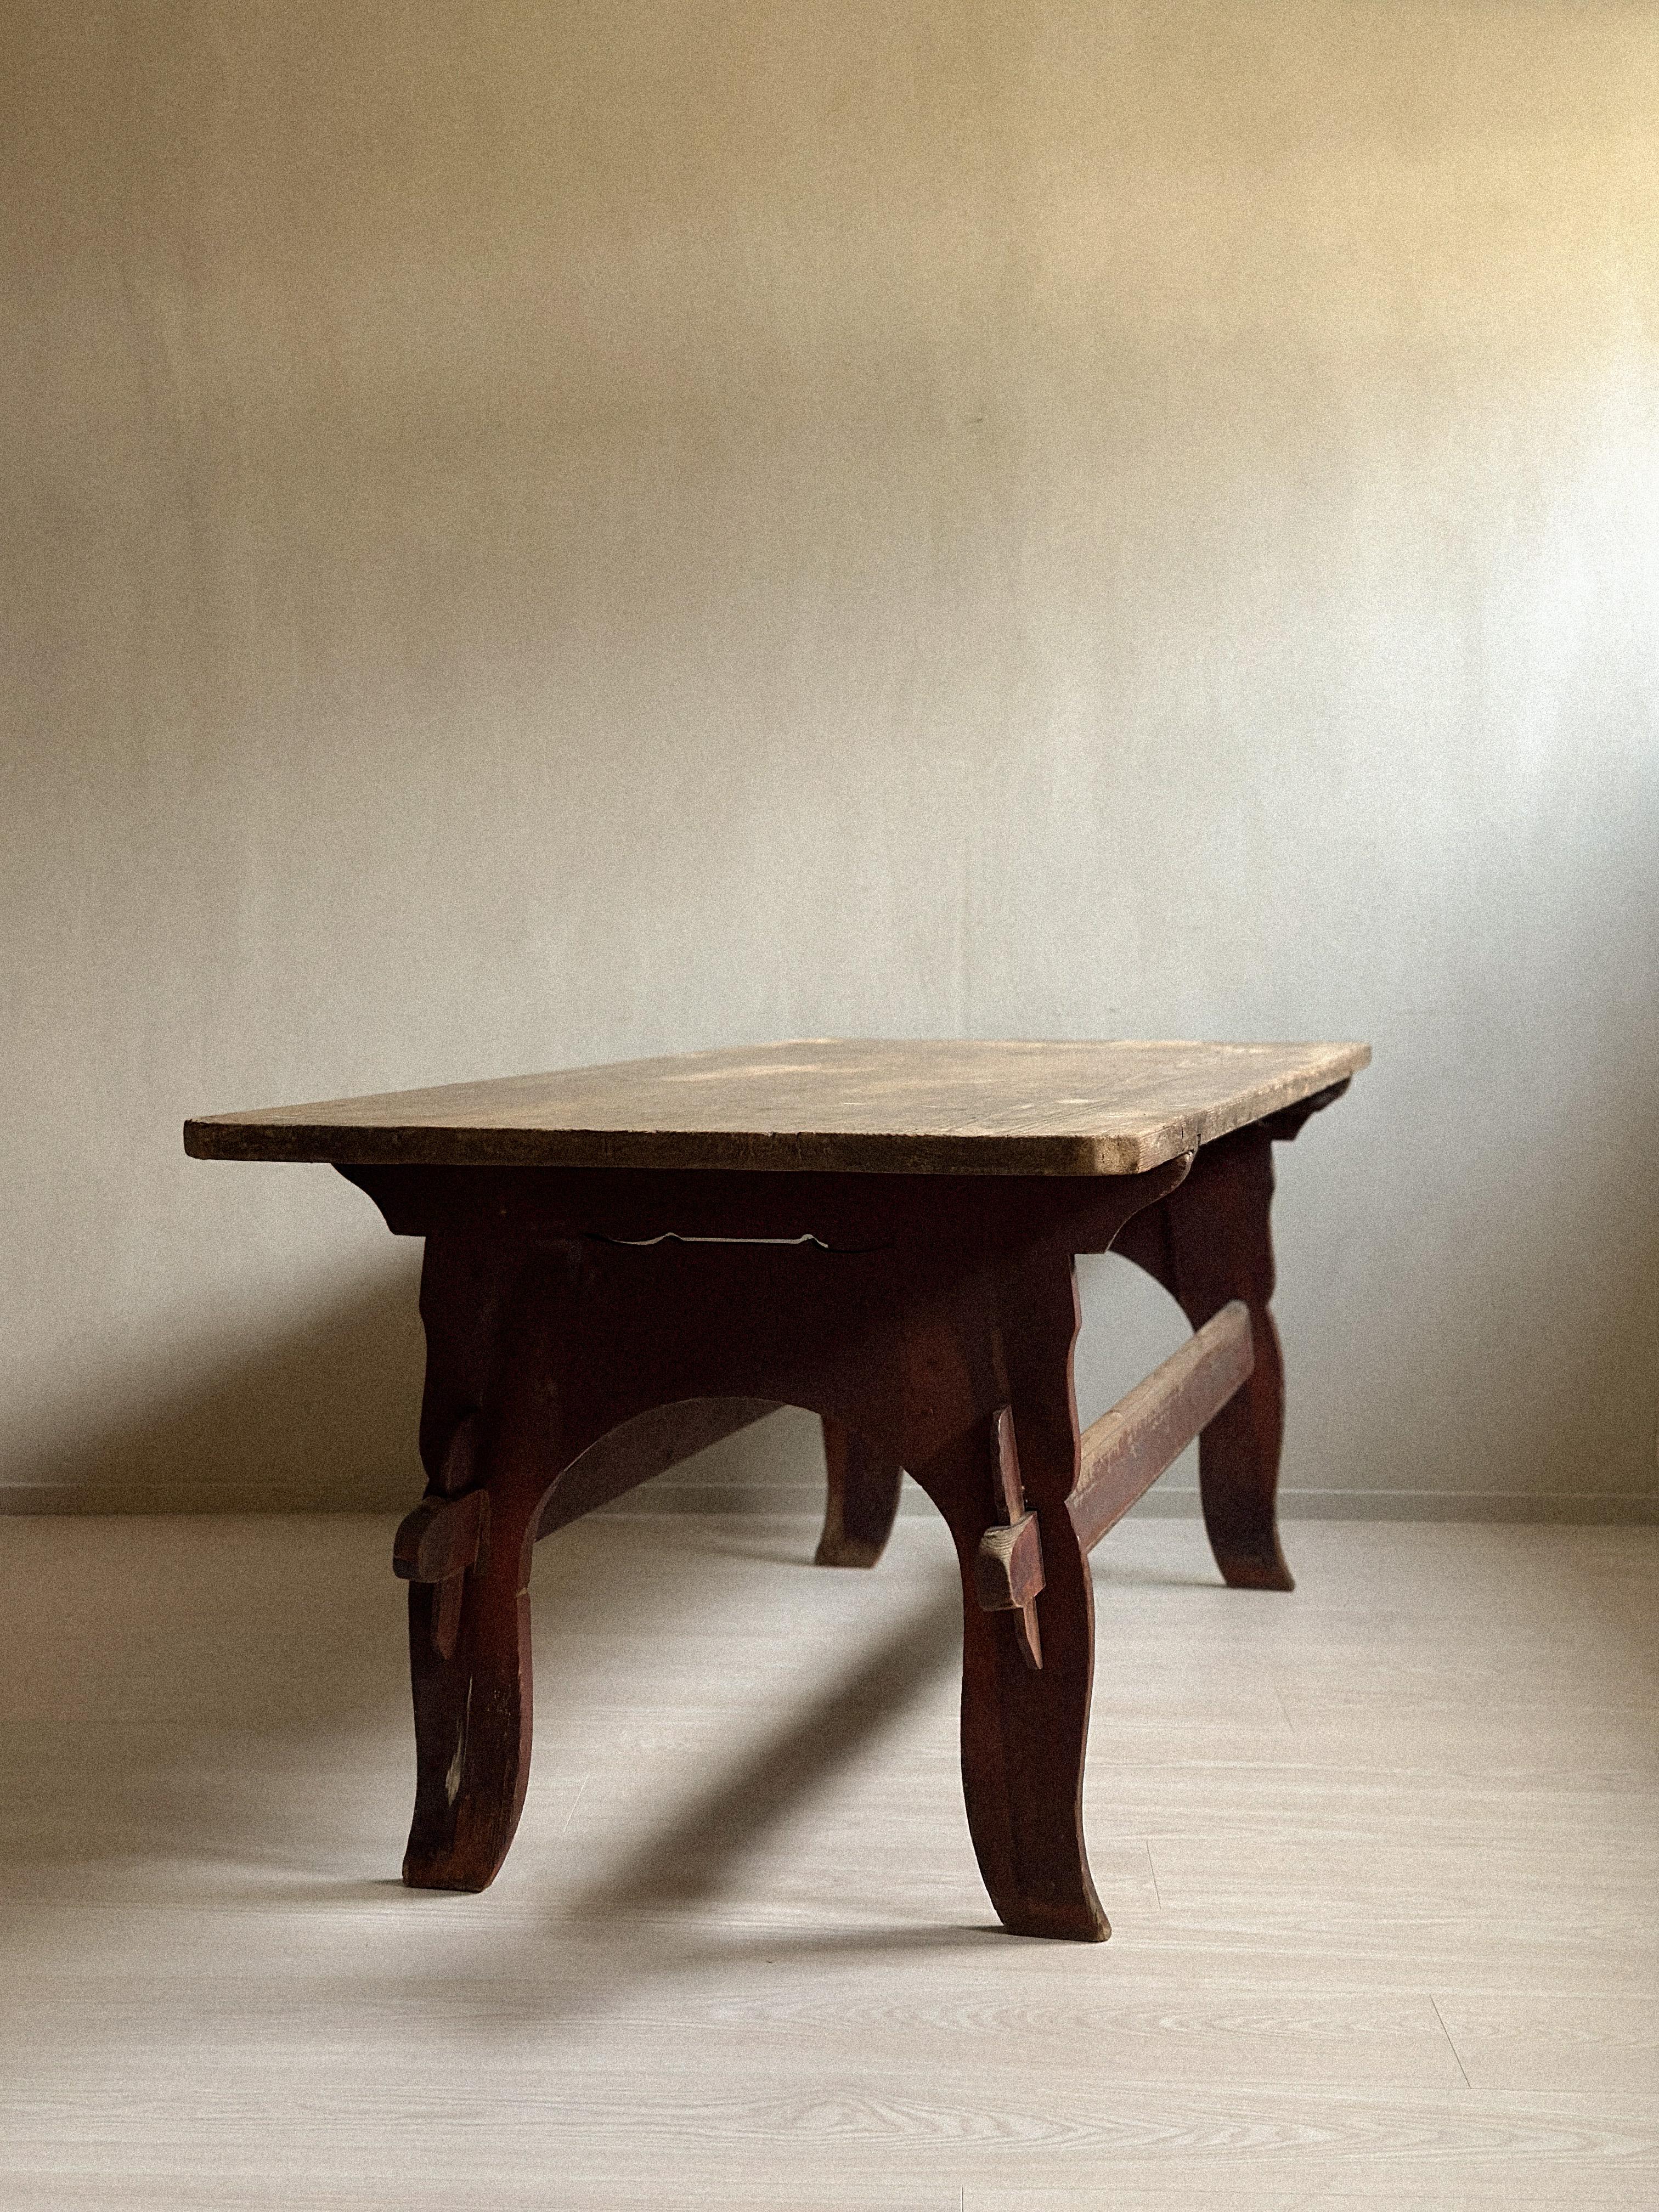 A wonderful antique wabi sabi dining table or desk with curved legs from Norway, Scandinavia, c. 1800s. Originally red/brown paint on the legs and beautiful patina on the top. 